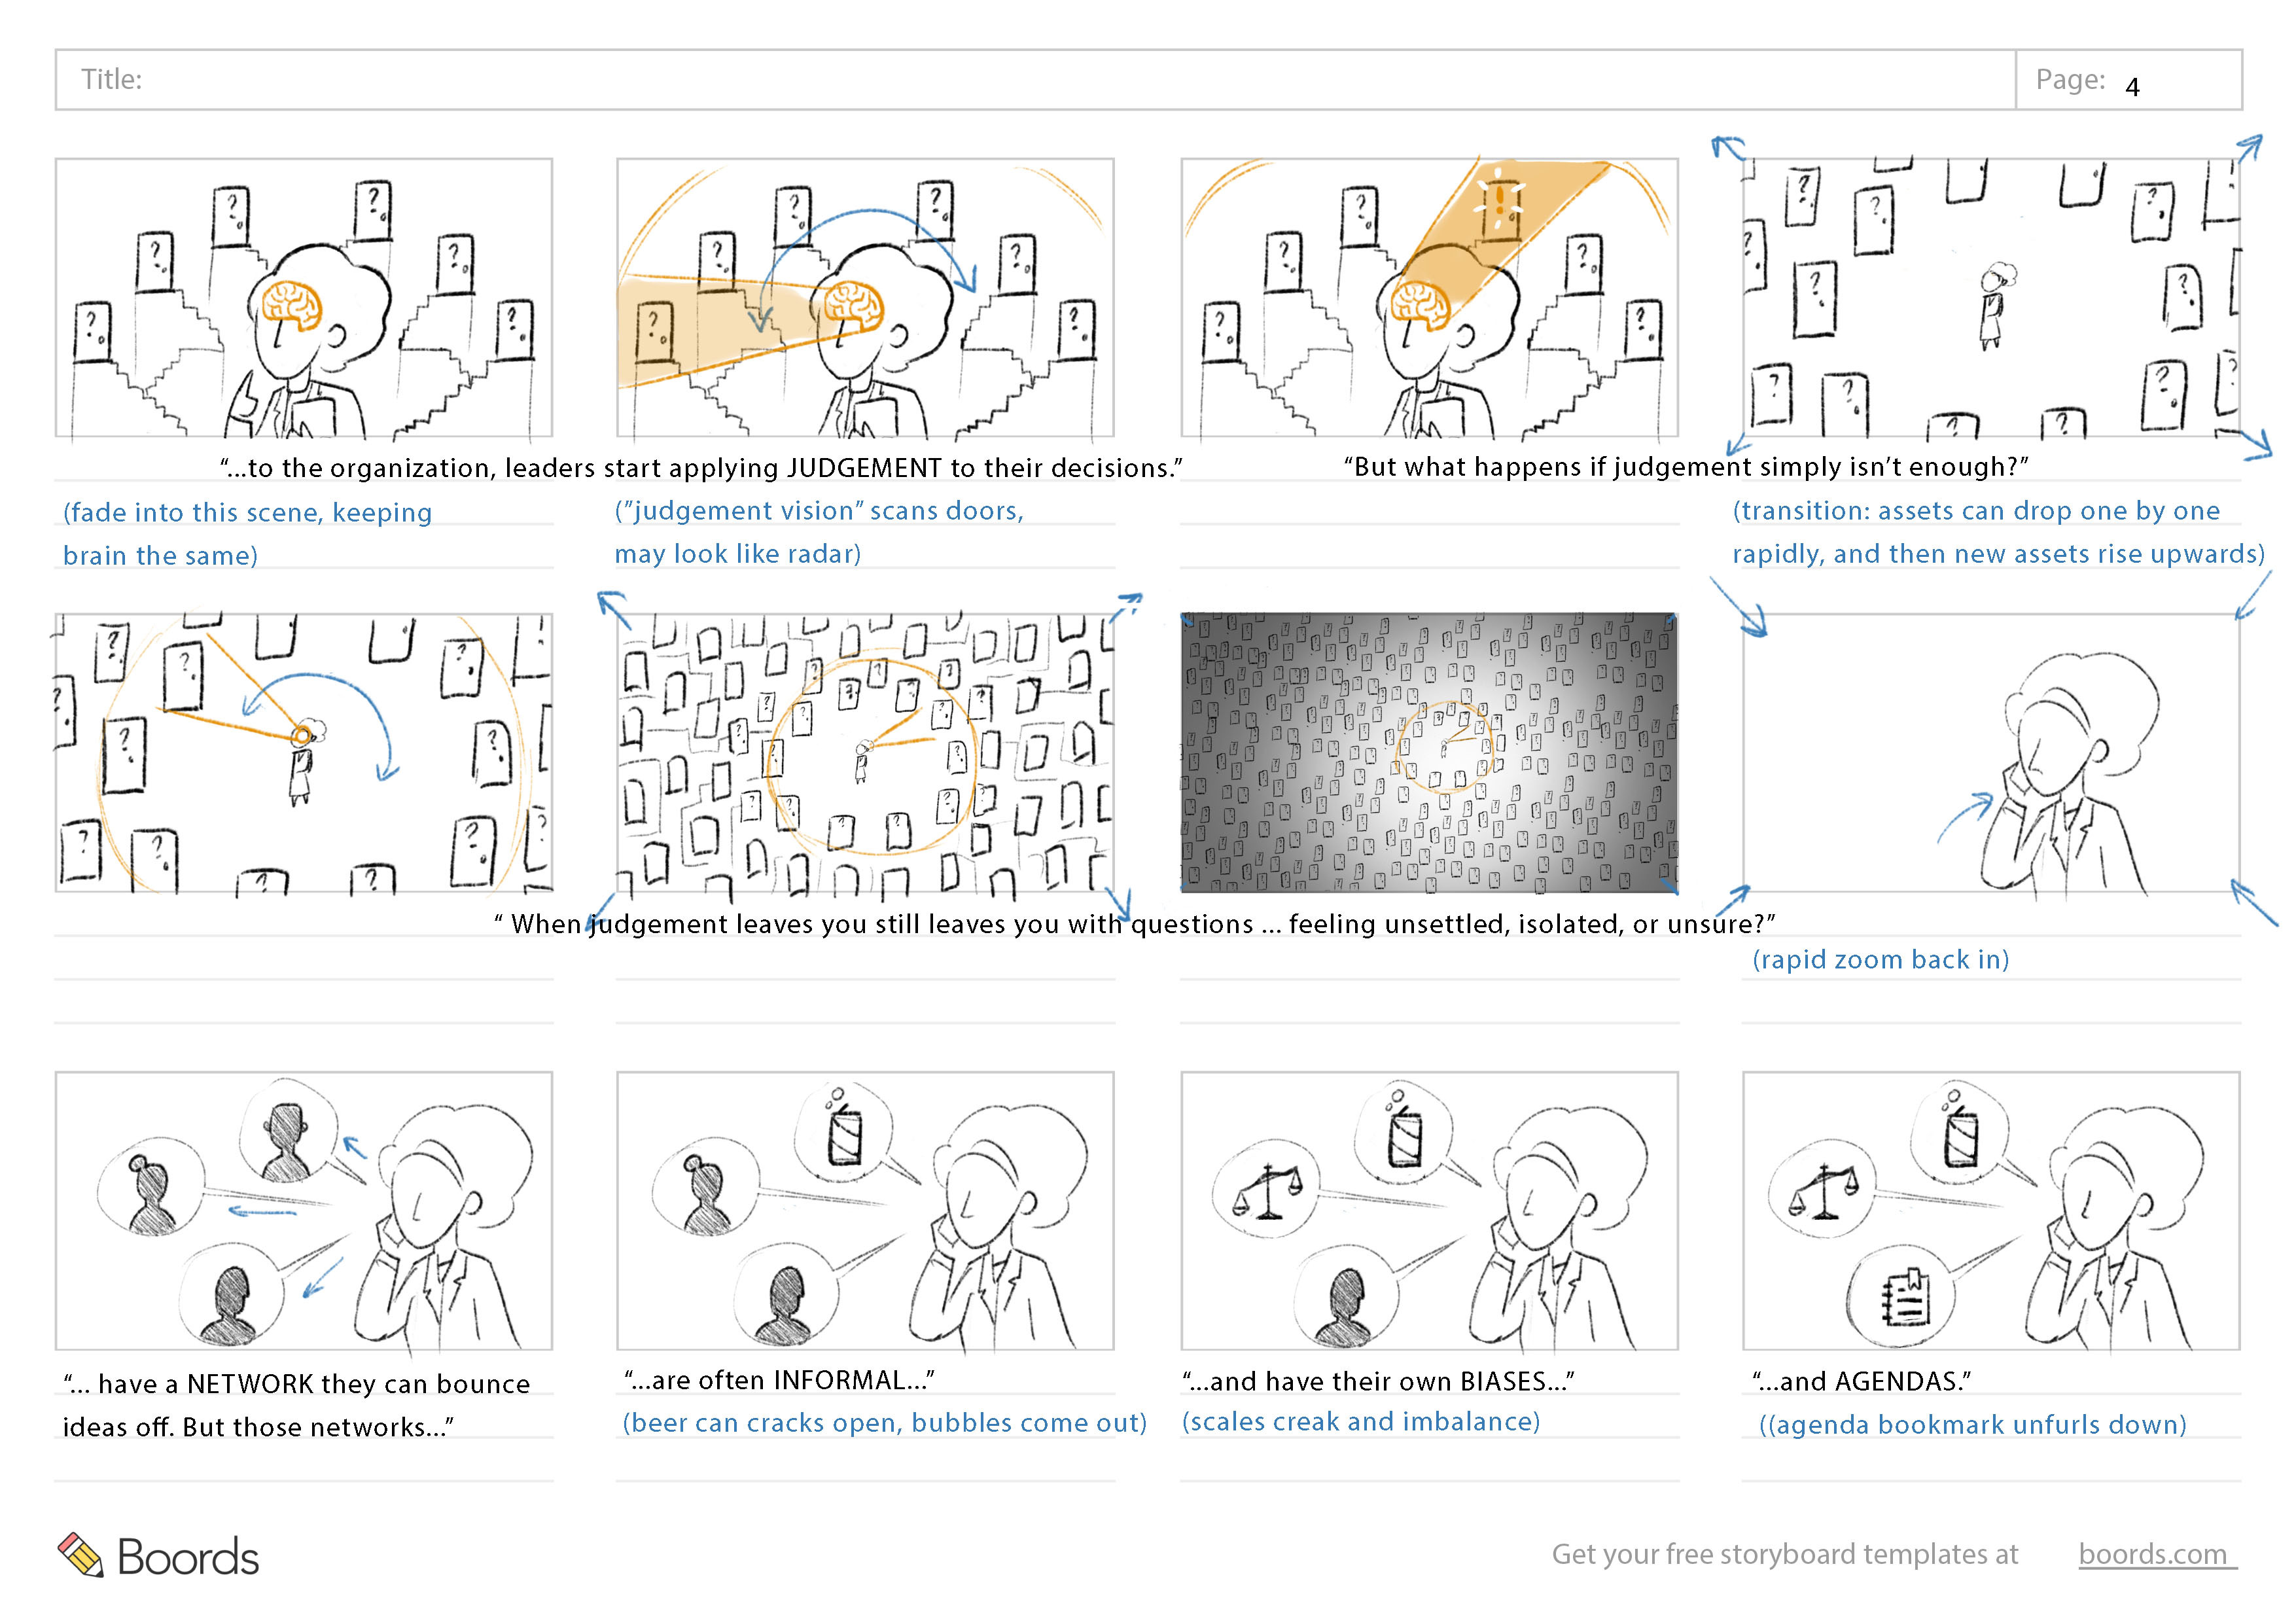 A version of the storyboards